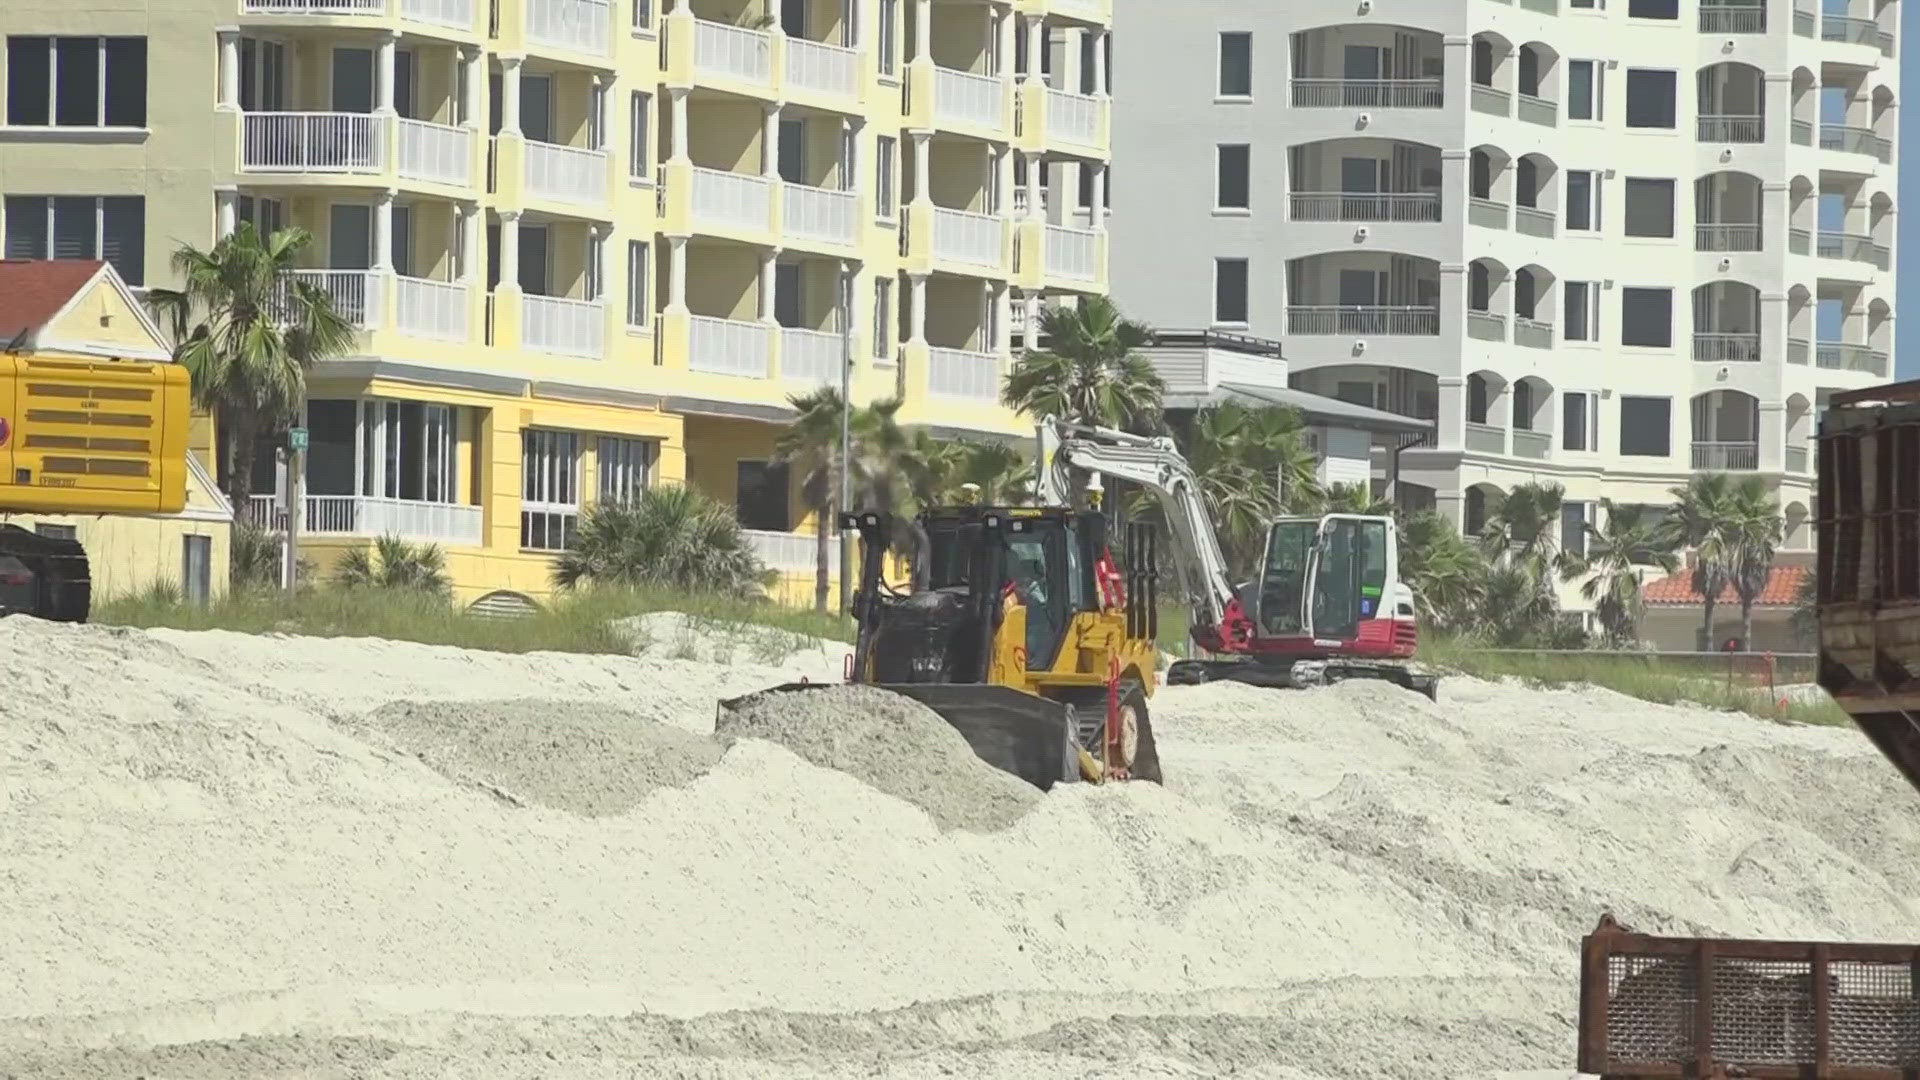 Leaders of Jacksonville gathered near the construction site on Jacksonville Beach, all to address the importance of the beach renourishment project.